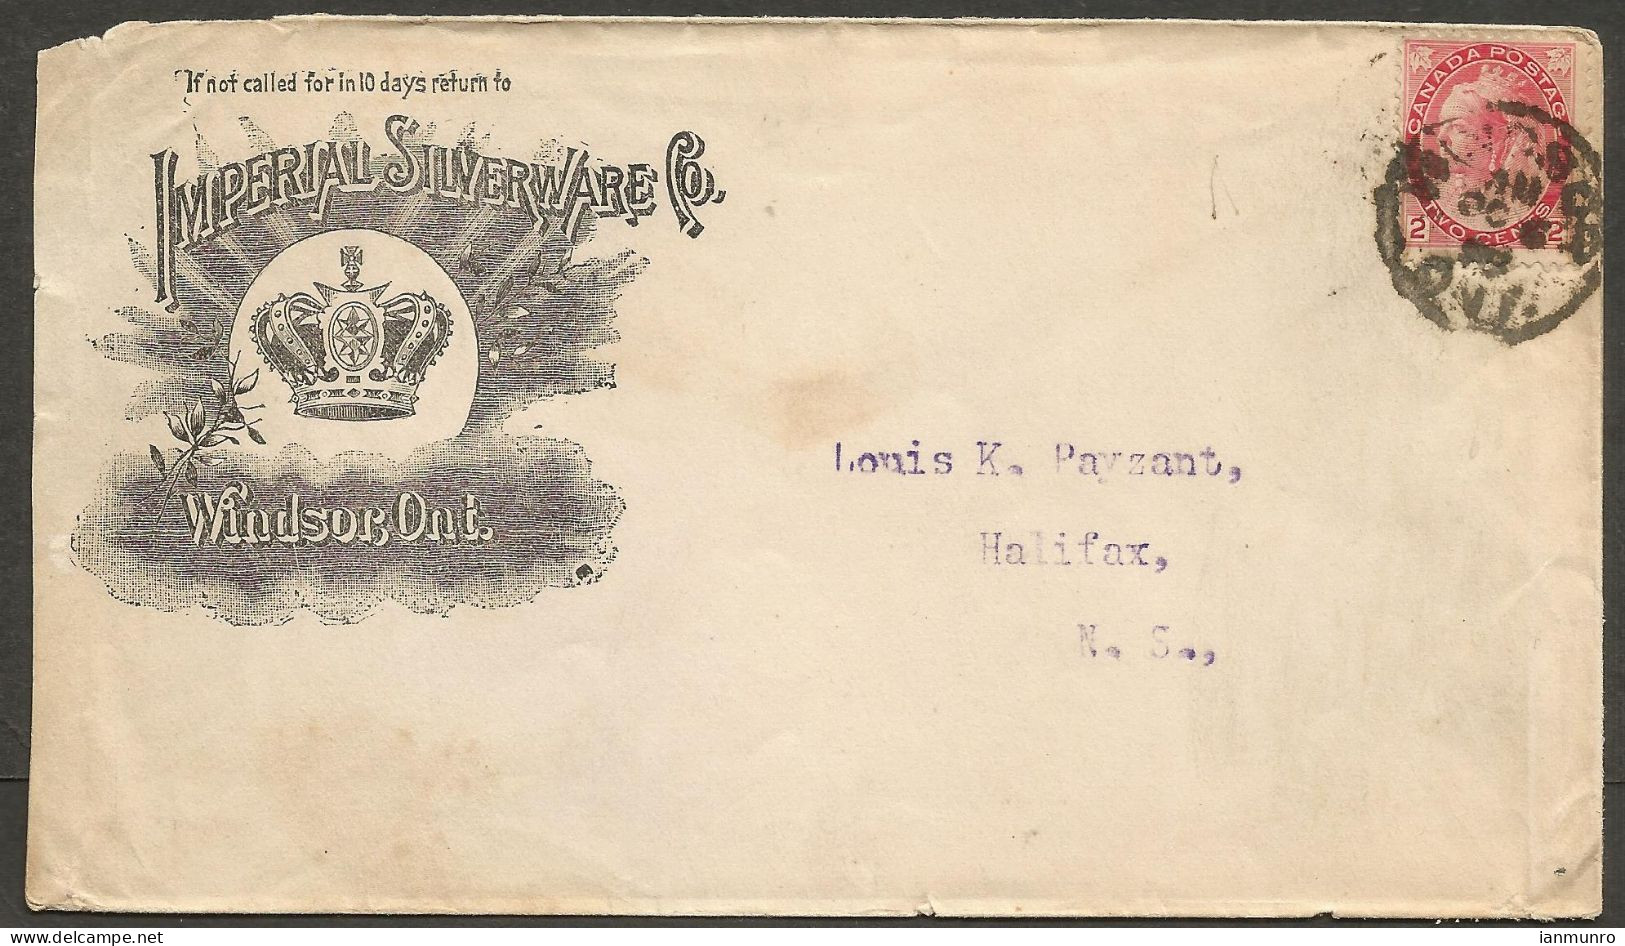 1899 Imperial Silverware Illustrated Advertising Cover 2c CDS Windsor Ontario - Postal History